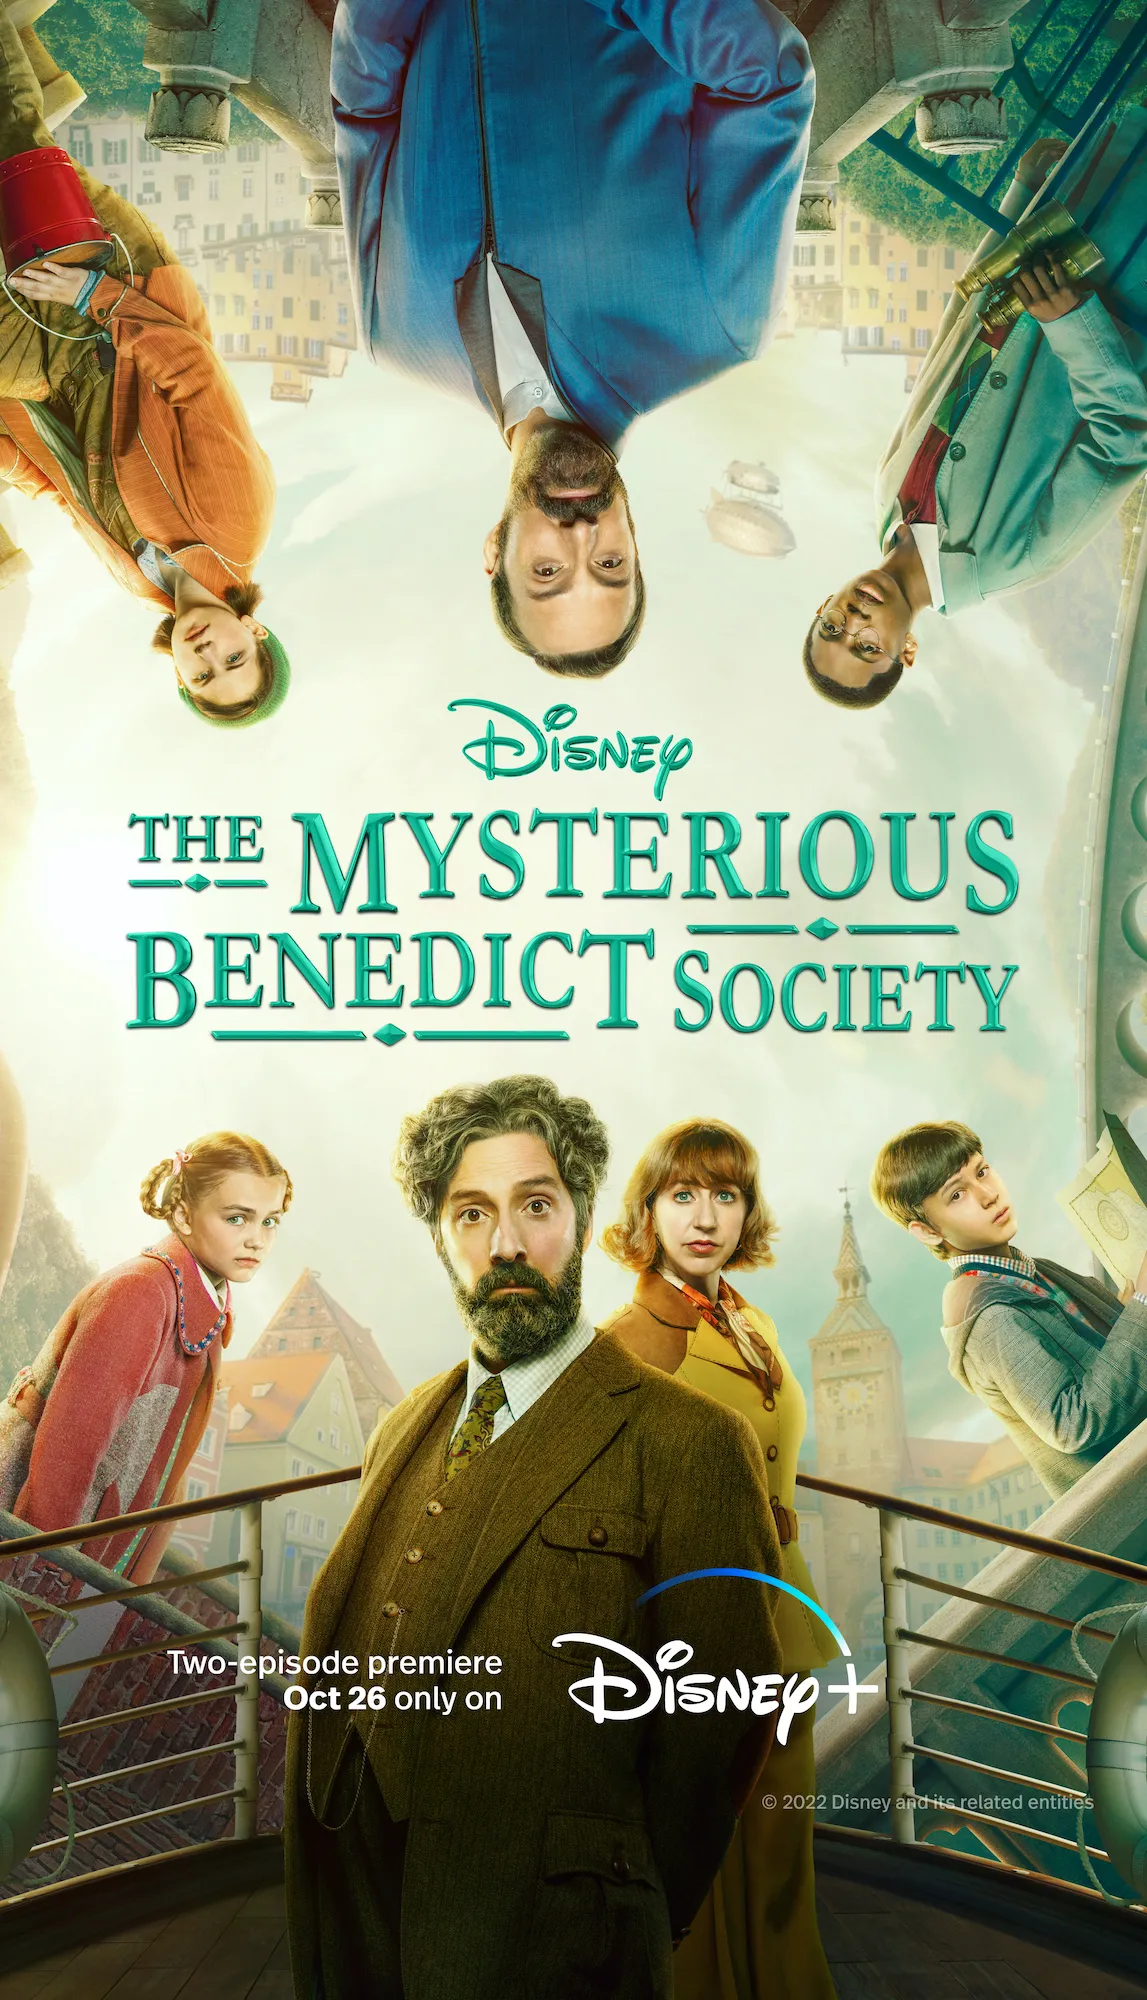 The Mysterious Benedict Society on Disney+